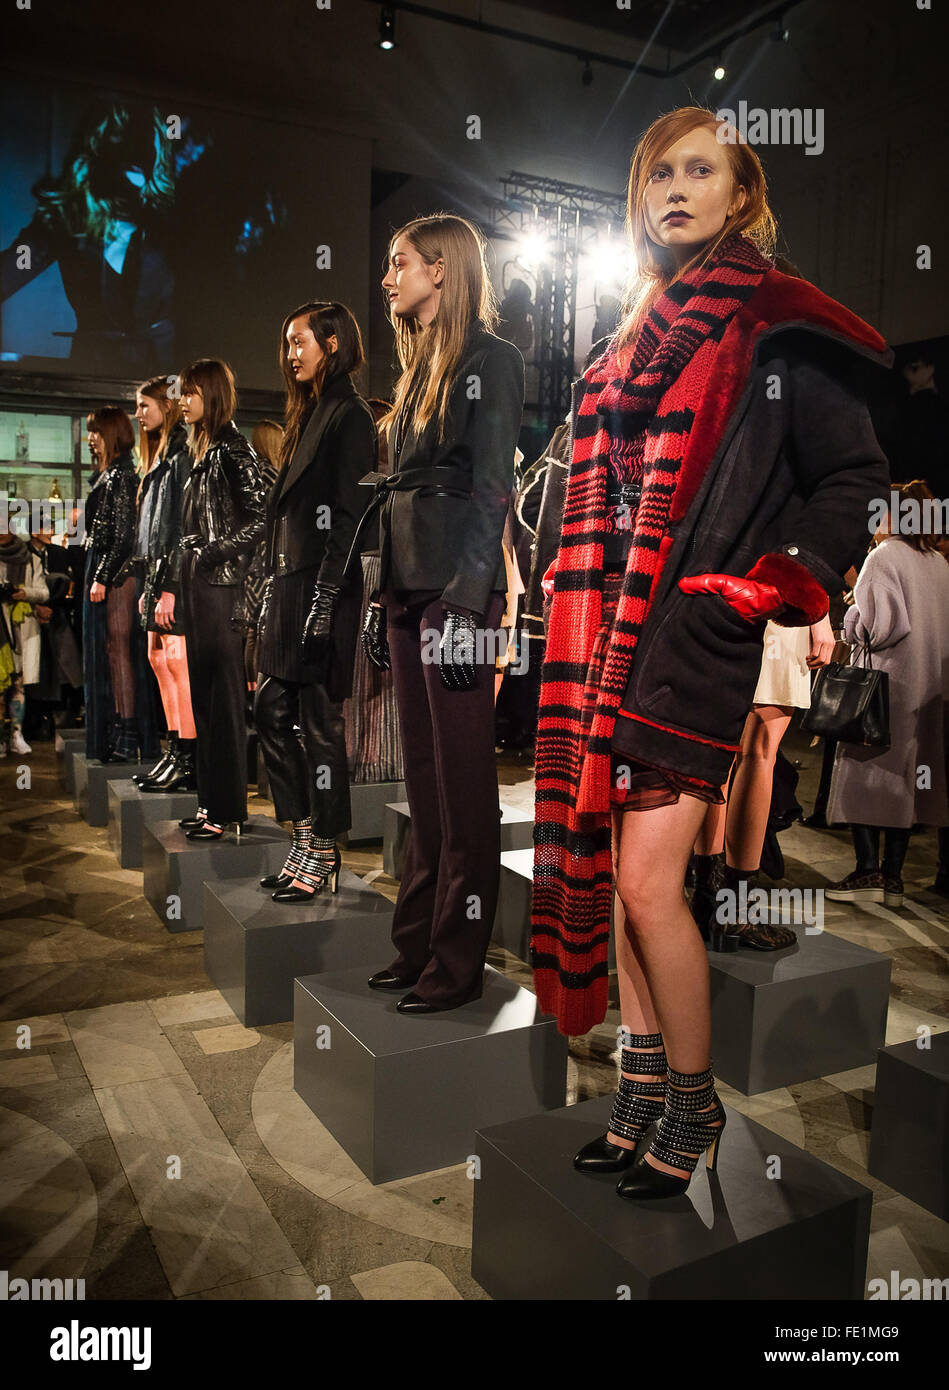 Stockholm, Sweden. 3rd Feb, 2016. Models display designs from Swedish  fashion brand J. Lindeberg during the Stockholm Fashion Week autumn/winter  2016 in Stockholm, capital of Sweden, on Feb. 3, 2016. The collection